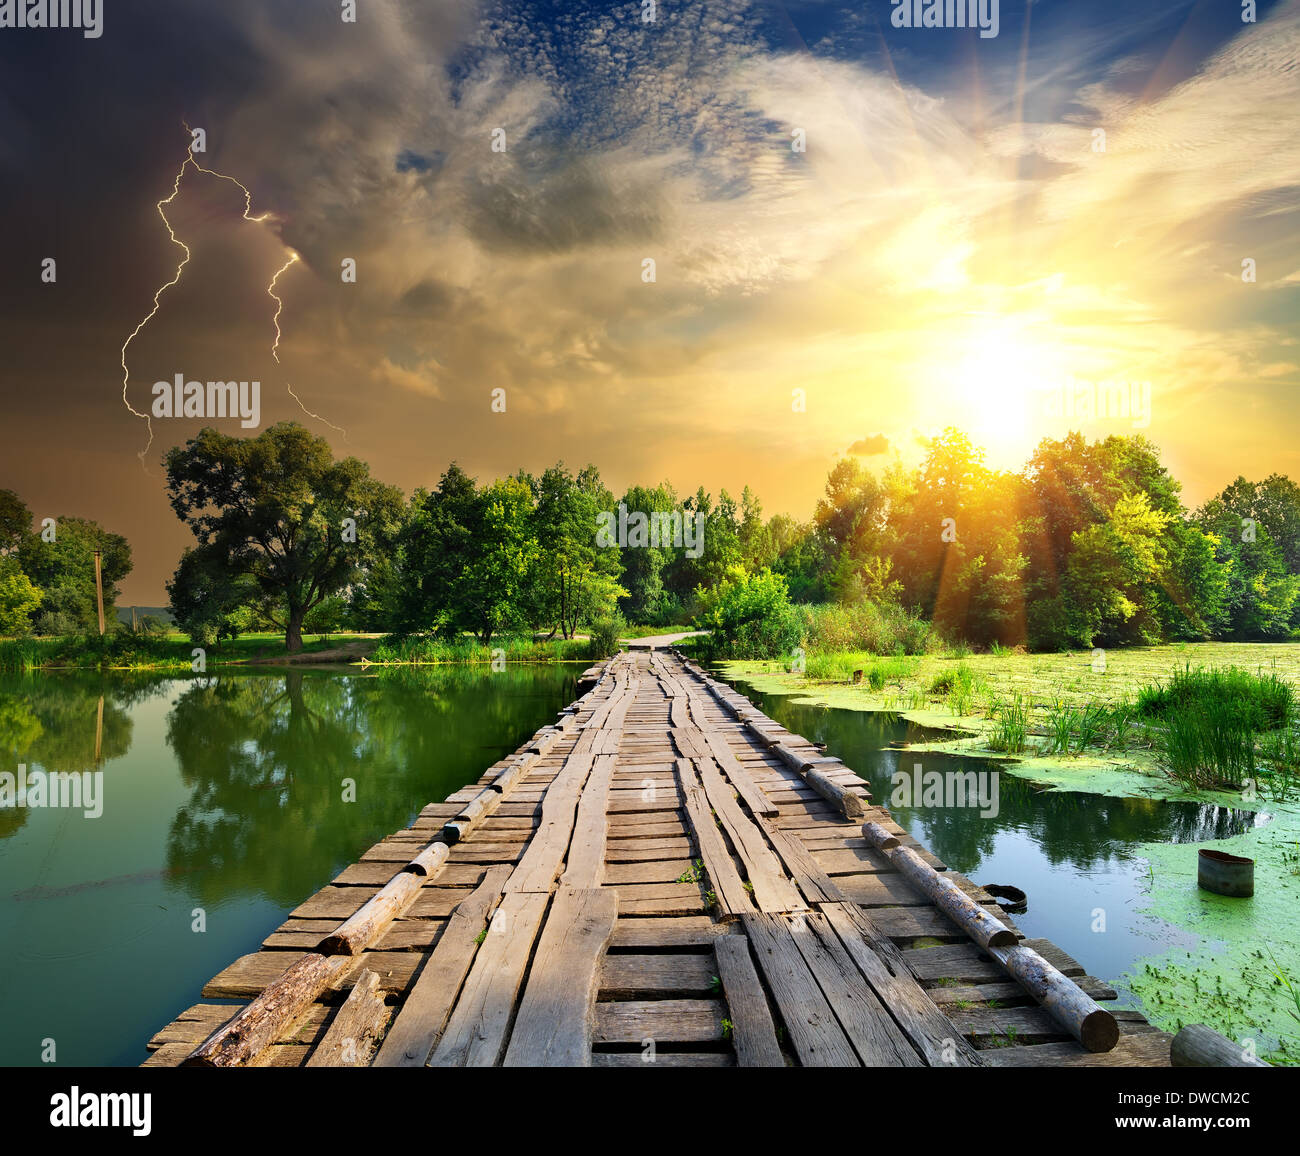 Lightning over a wooden bridge on a river Stock Photo